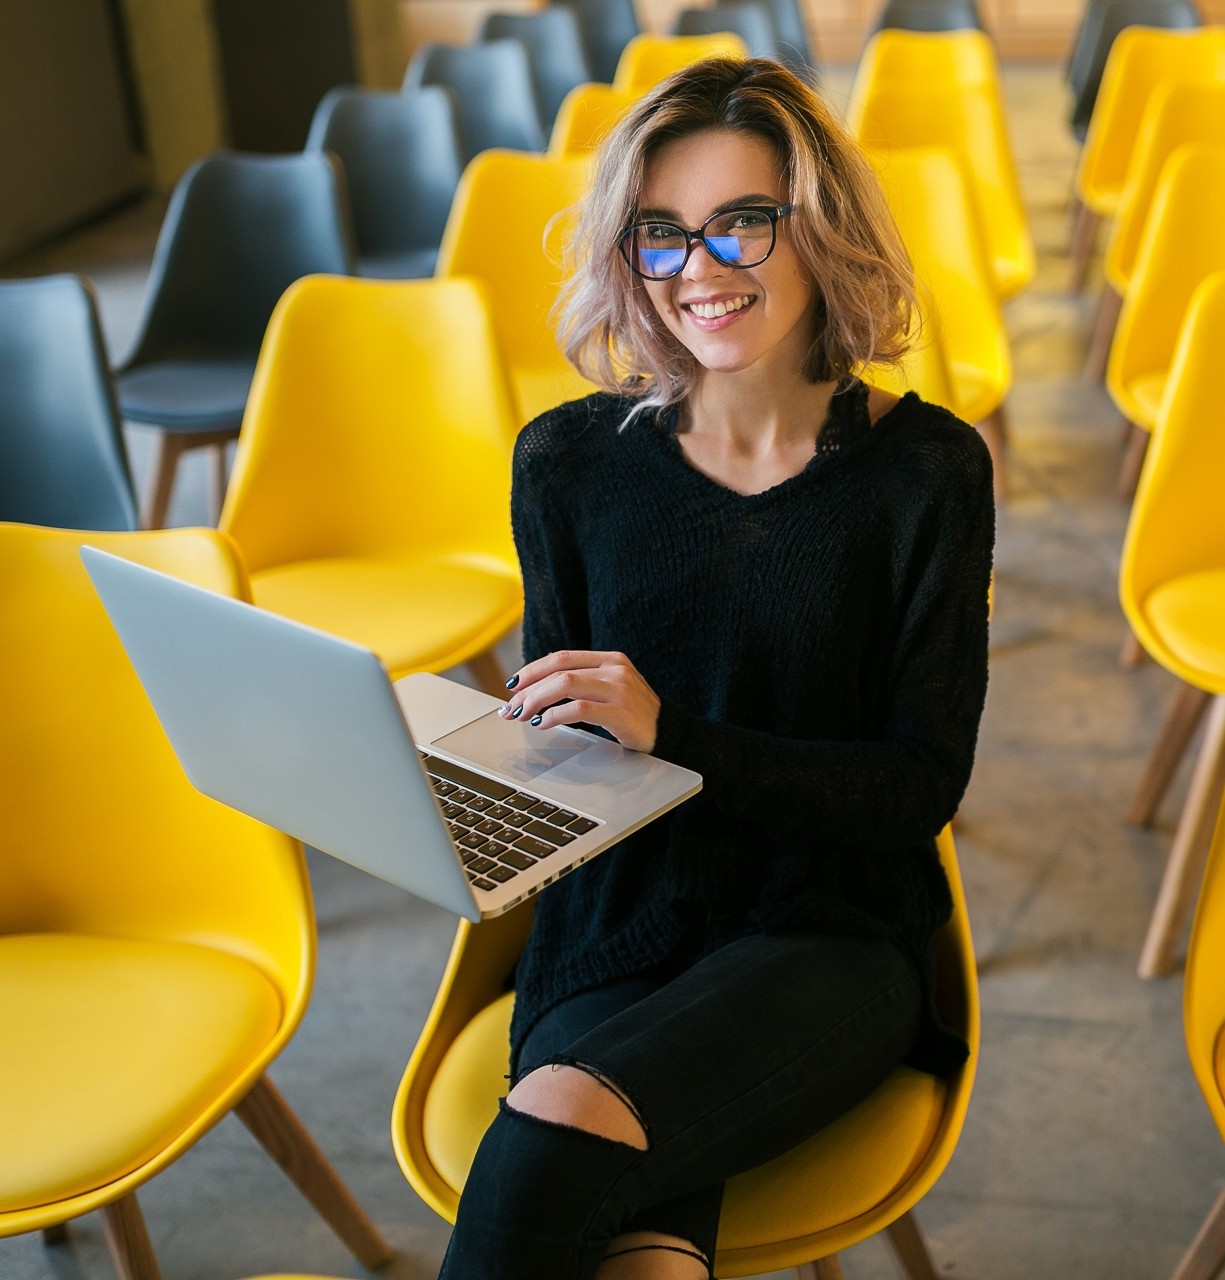 166012251280408-portrait-young-attractive-woman-sitting-lecture-hall-working-laptop-wearing-glas.jpg